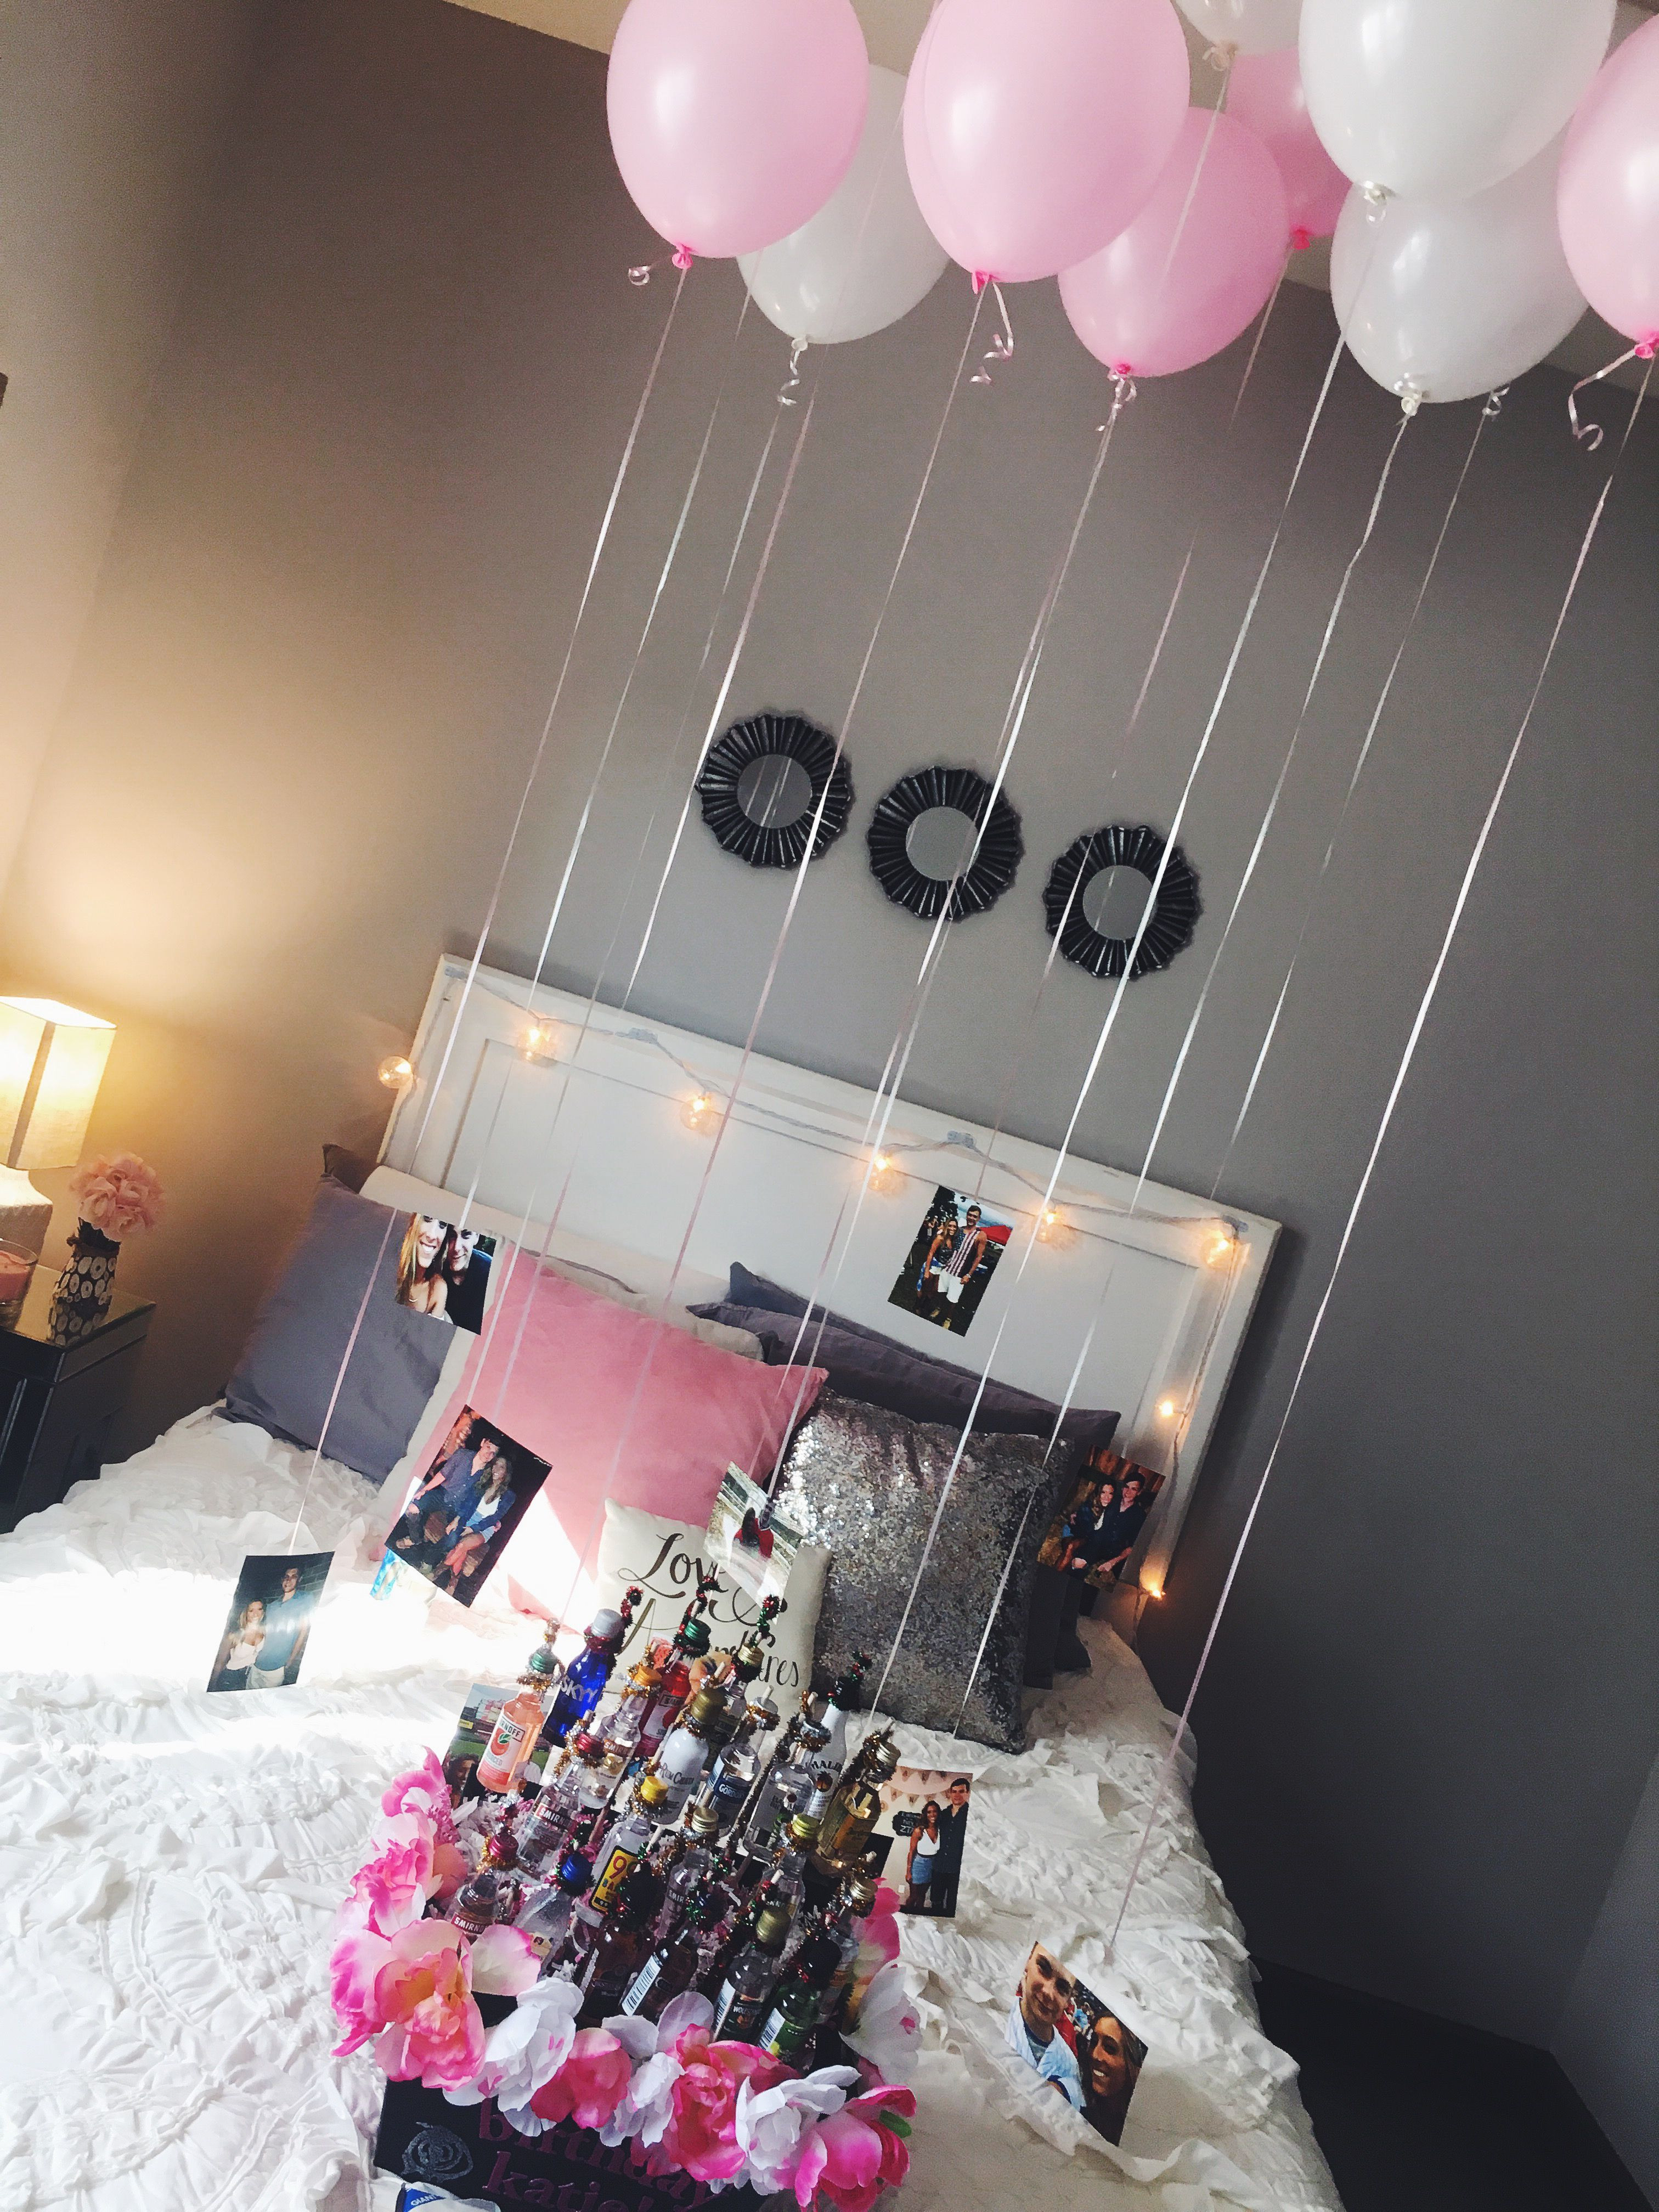 Birthday Gift Ideas For A Girlfriend
 easy and cute decorations for a friend or girlfriends 21st